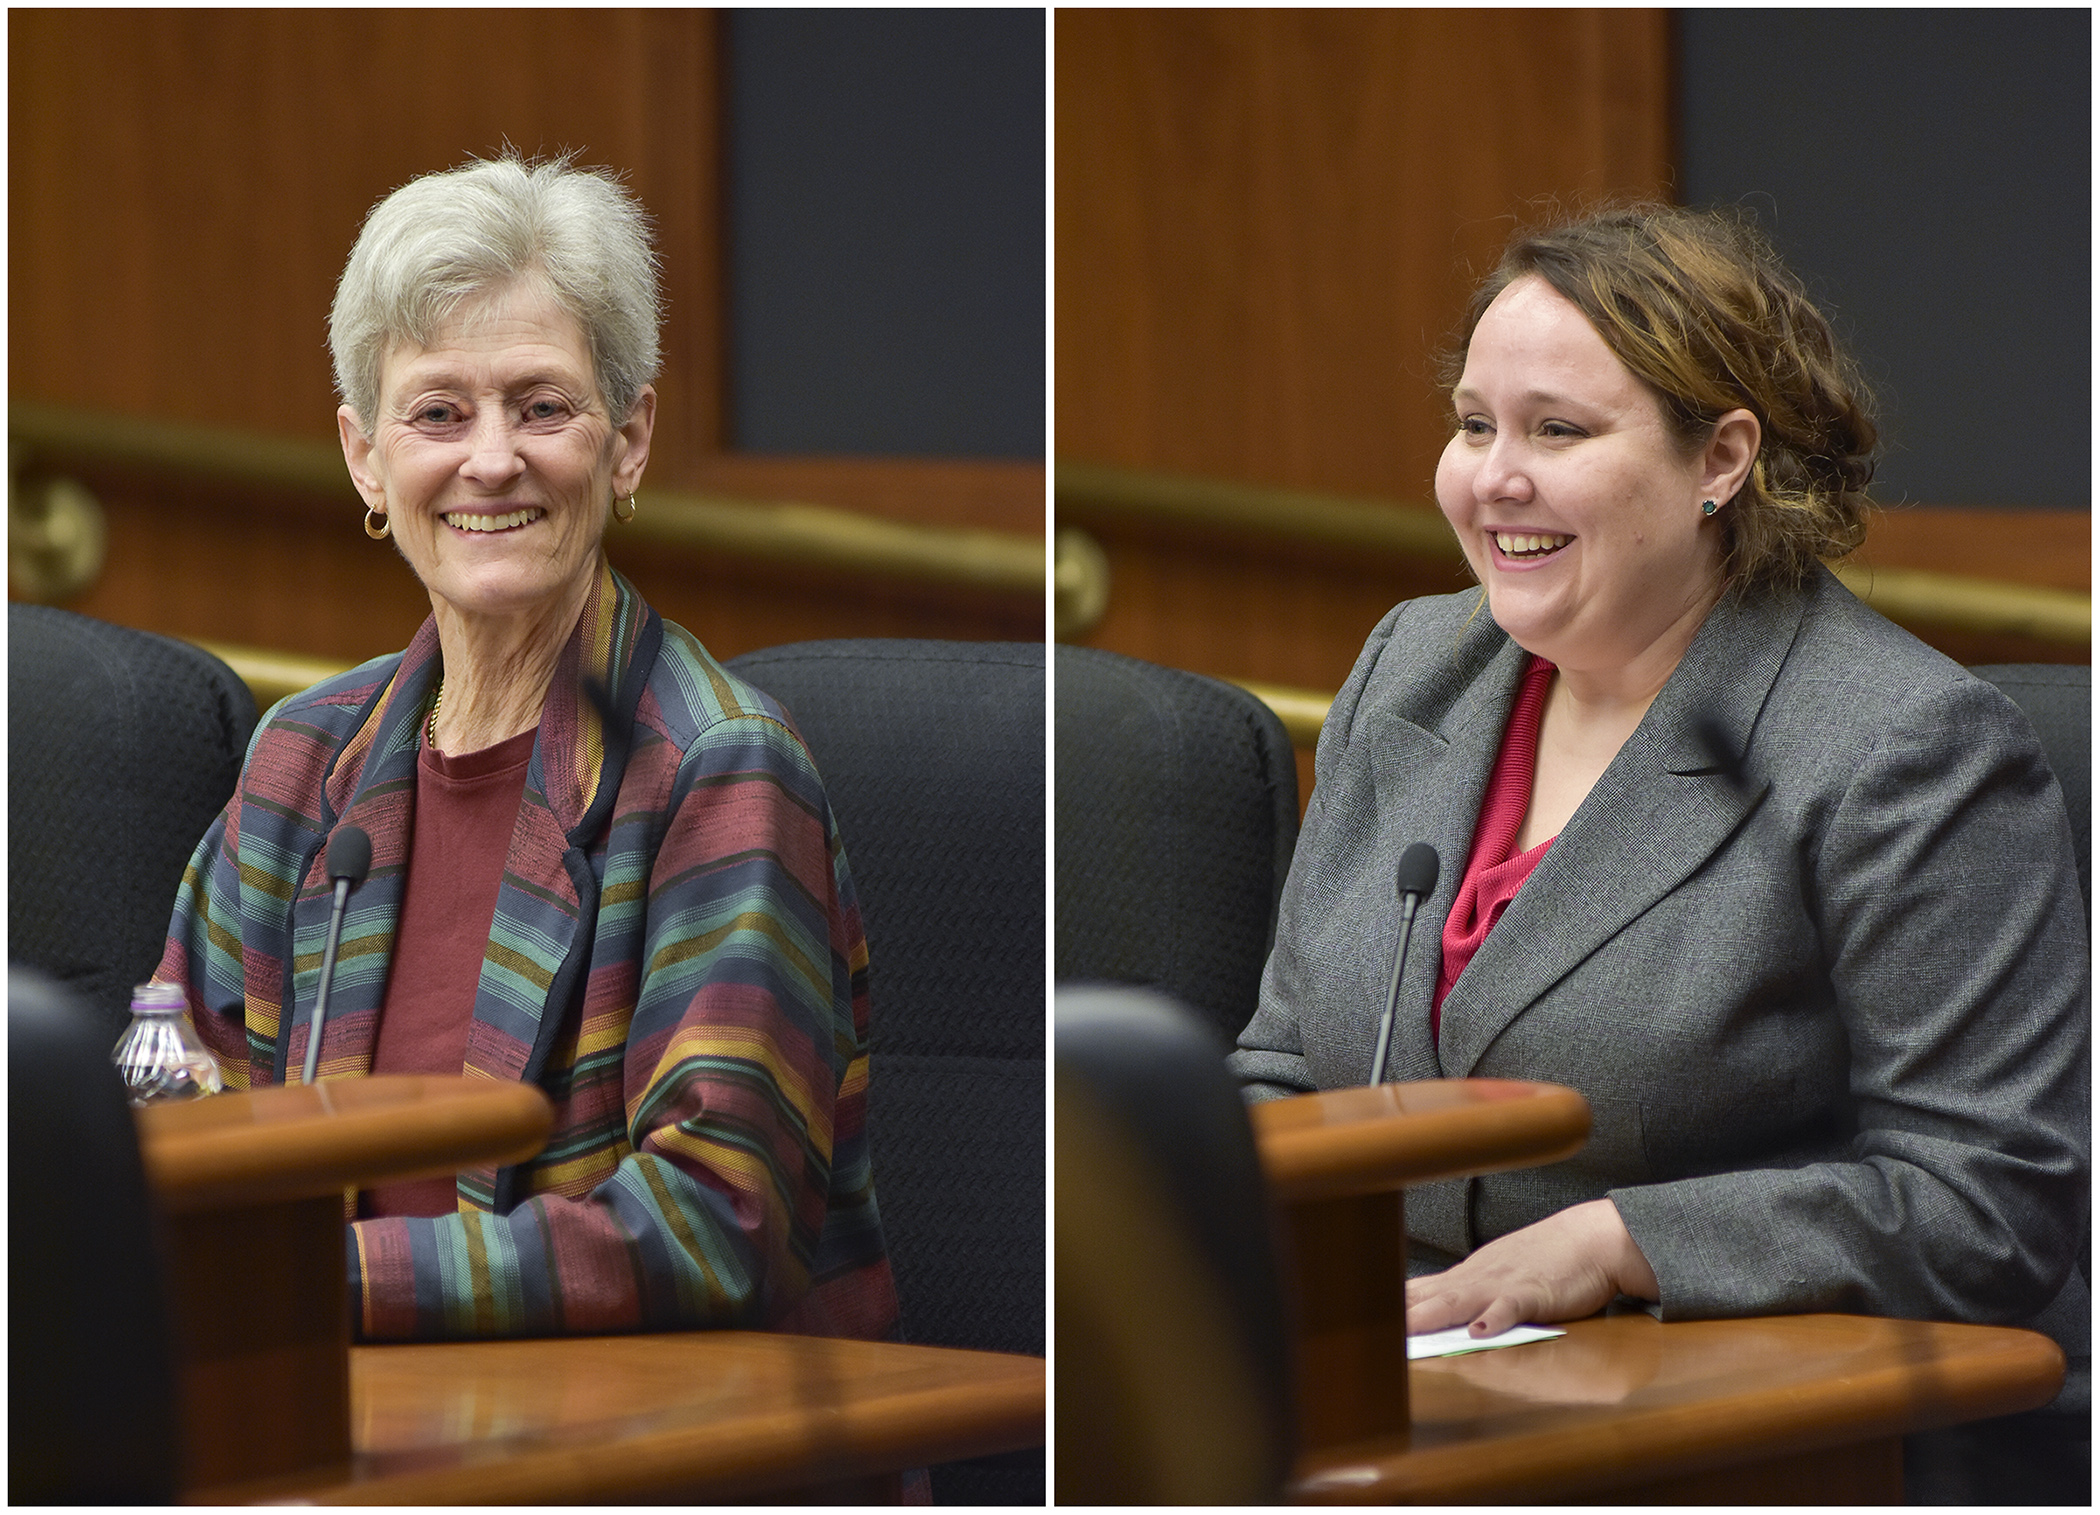 Margaret Leppik, left, and Emma Greenman were confirmed to the Campaign Finance Board by members of the House Government Operations and Elections Policy Committee April 19. Photo by Andrew VonBank